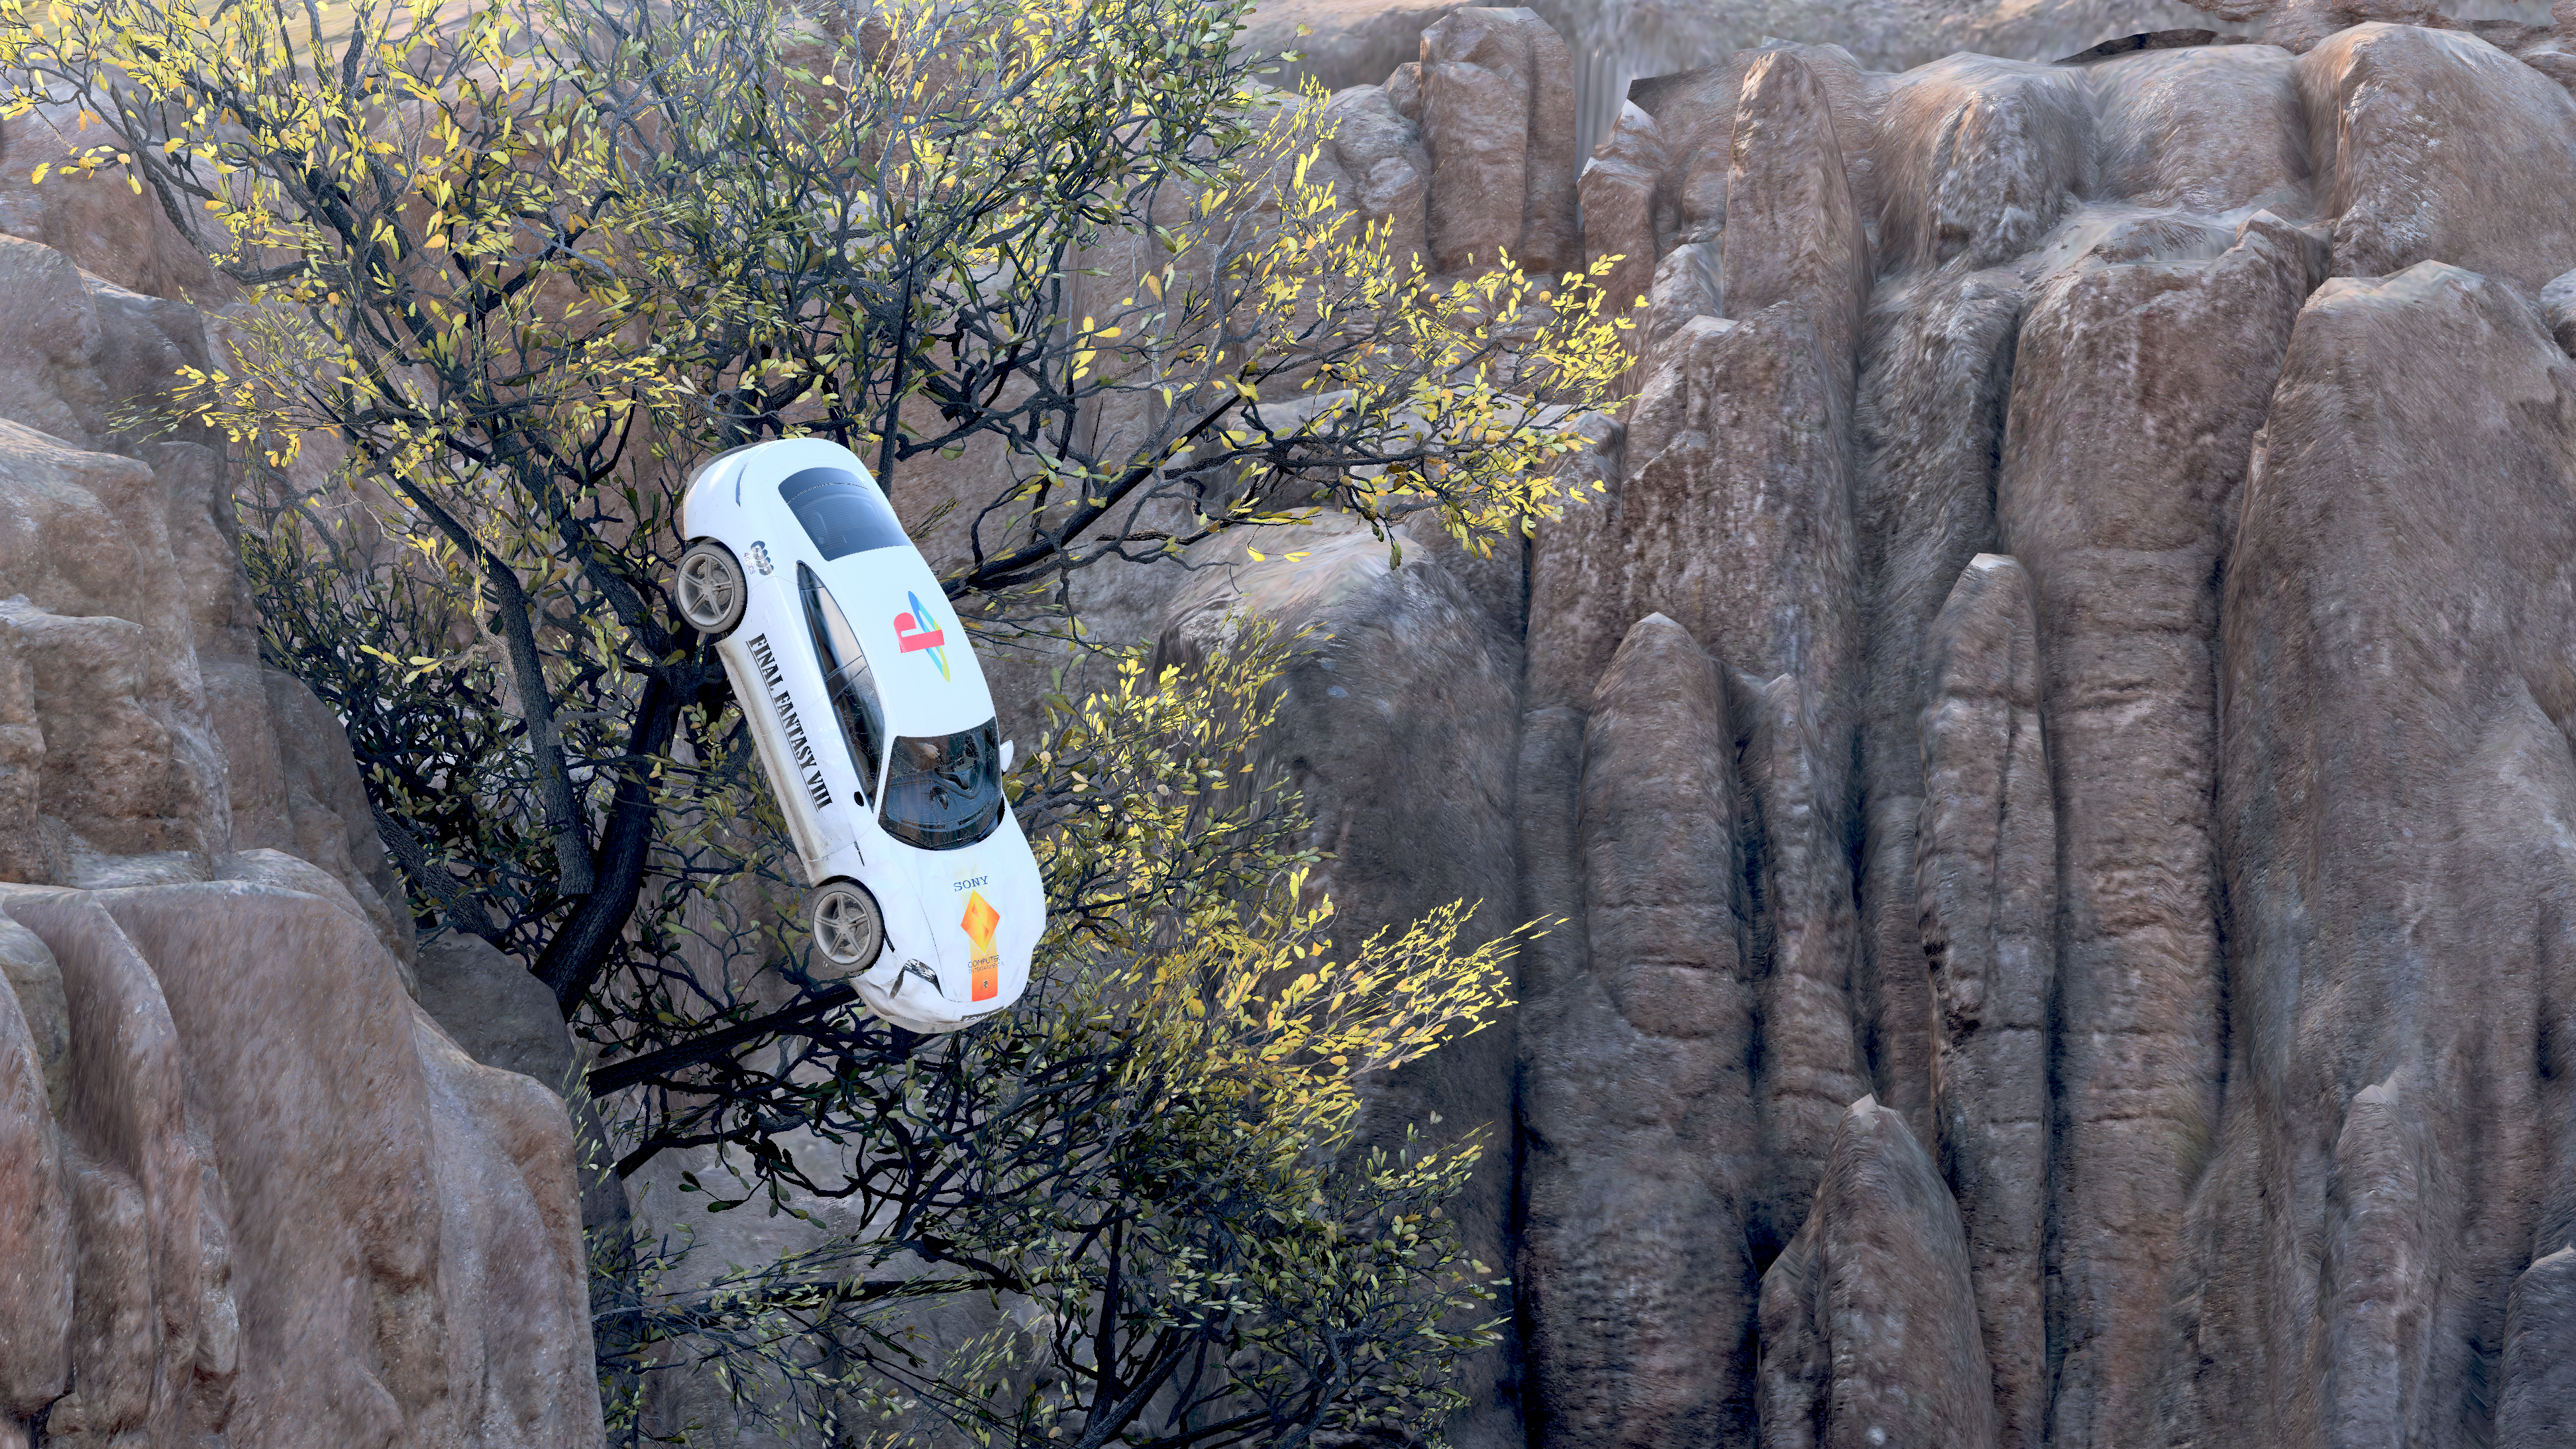 A white Porsche decorated with the Final Fantasy VIII logo on the side, the Sony Interactive Entertainment logo on the hood, and the PlayStation 1 logo on the roof. It is careening off a cliff at a near-vertical angle.